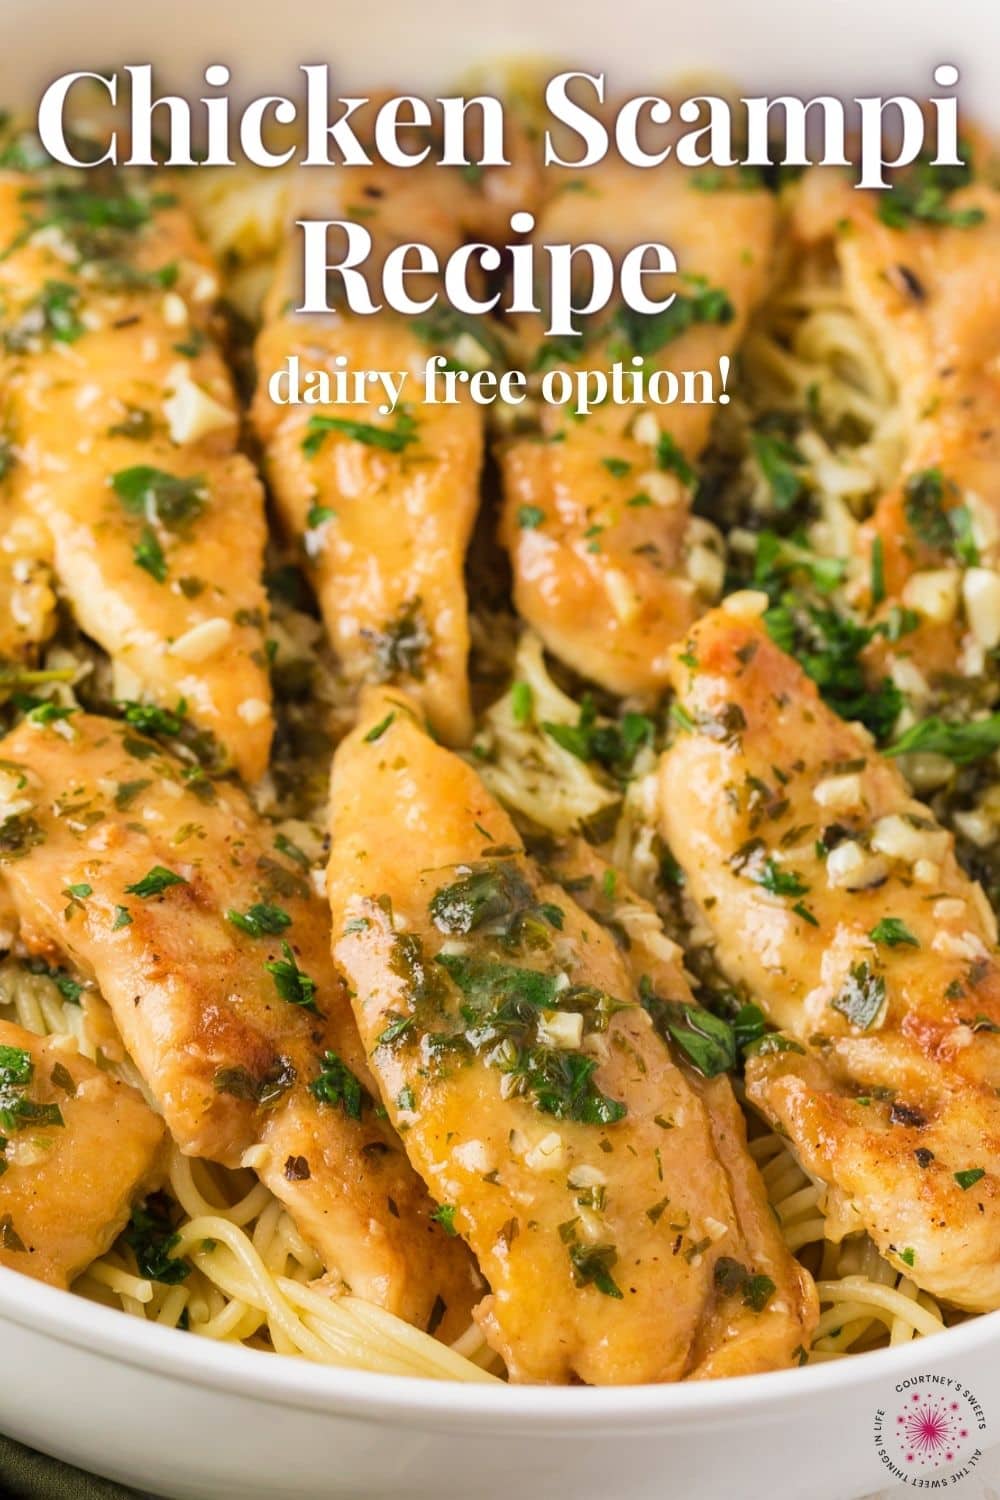 chicken scampi with pasta and text on image saying chicken scampi with dairy free option.